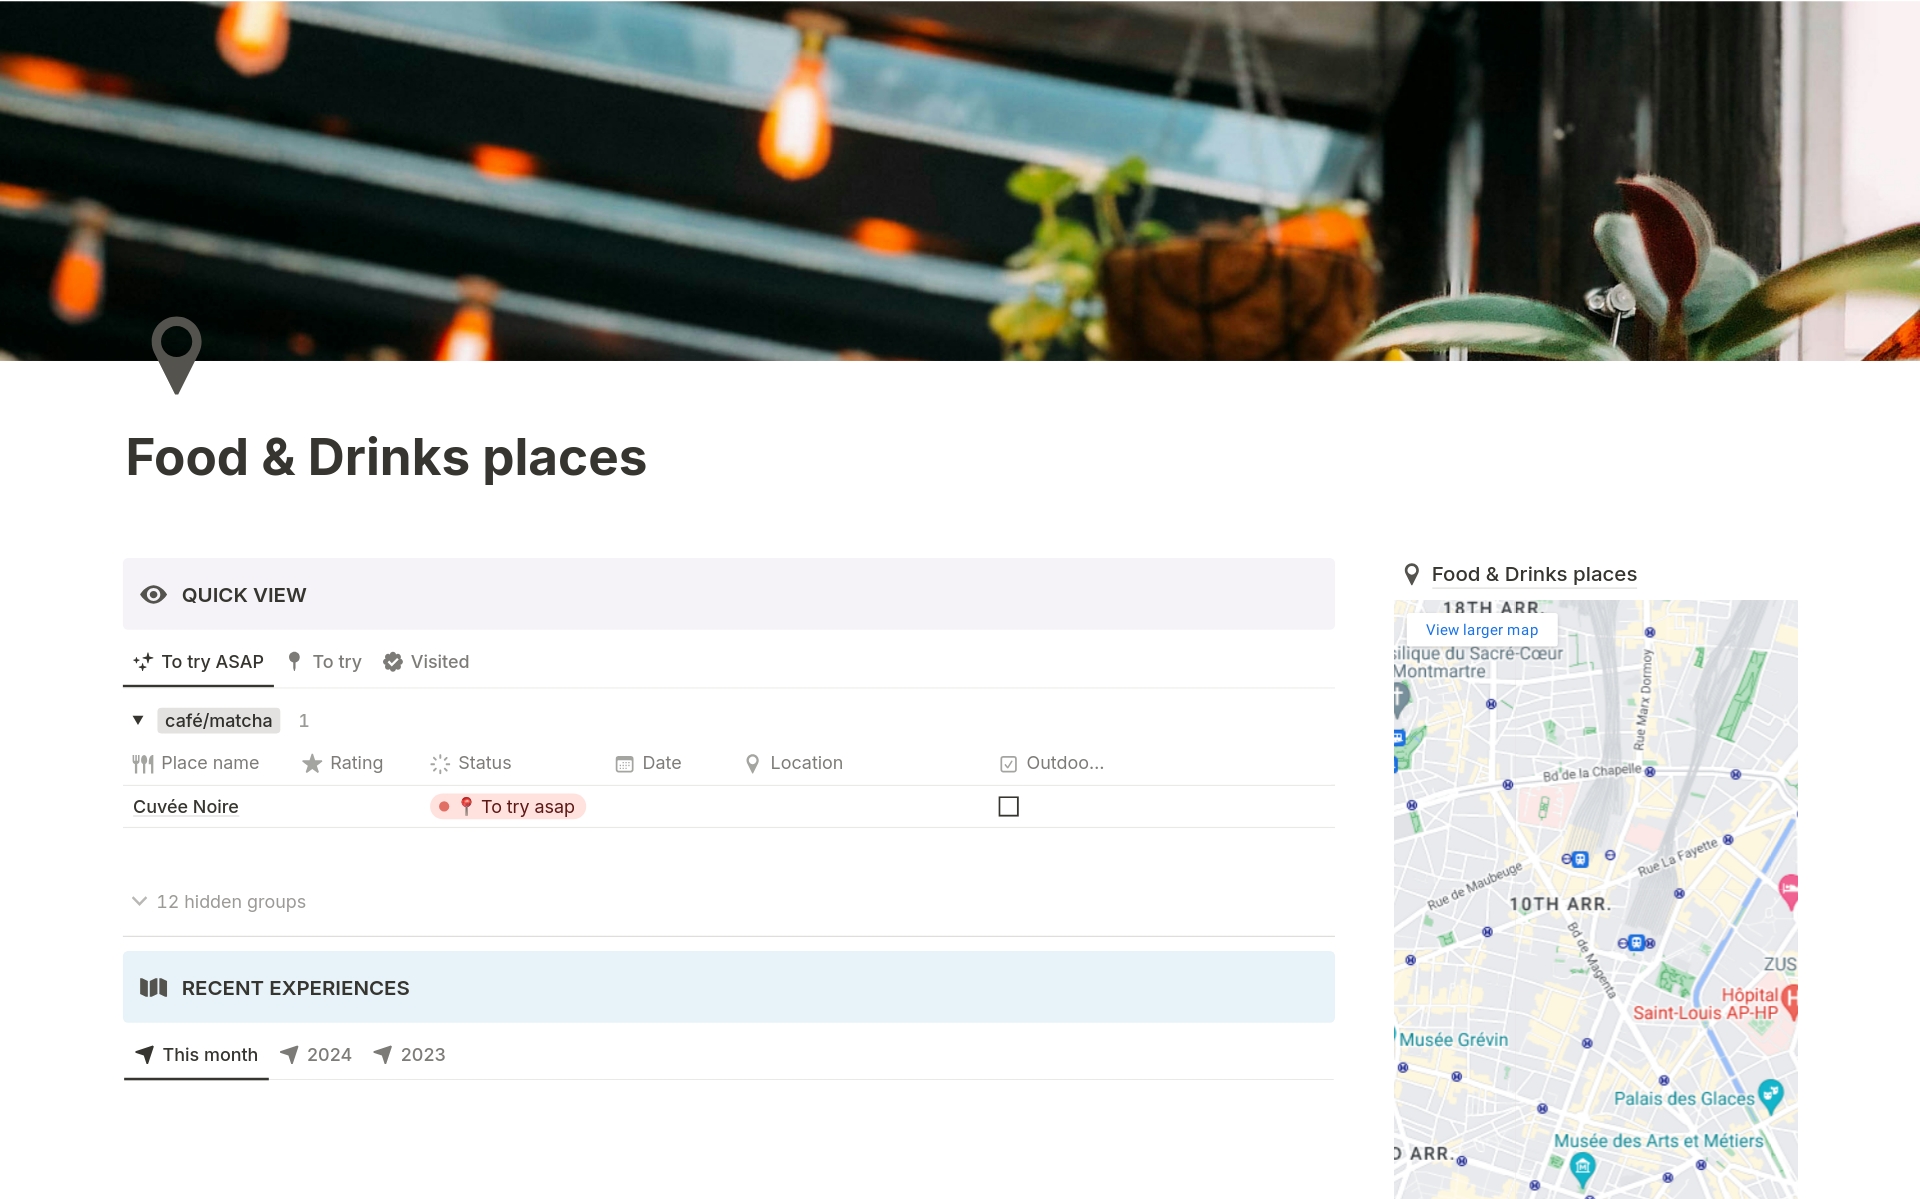 This Notion Food & Drinks places template is perfect for all the foodies that like to keep track of the places, restaurants, coffee shops, bar they are visiting.

